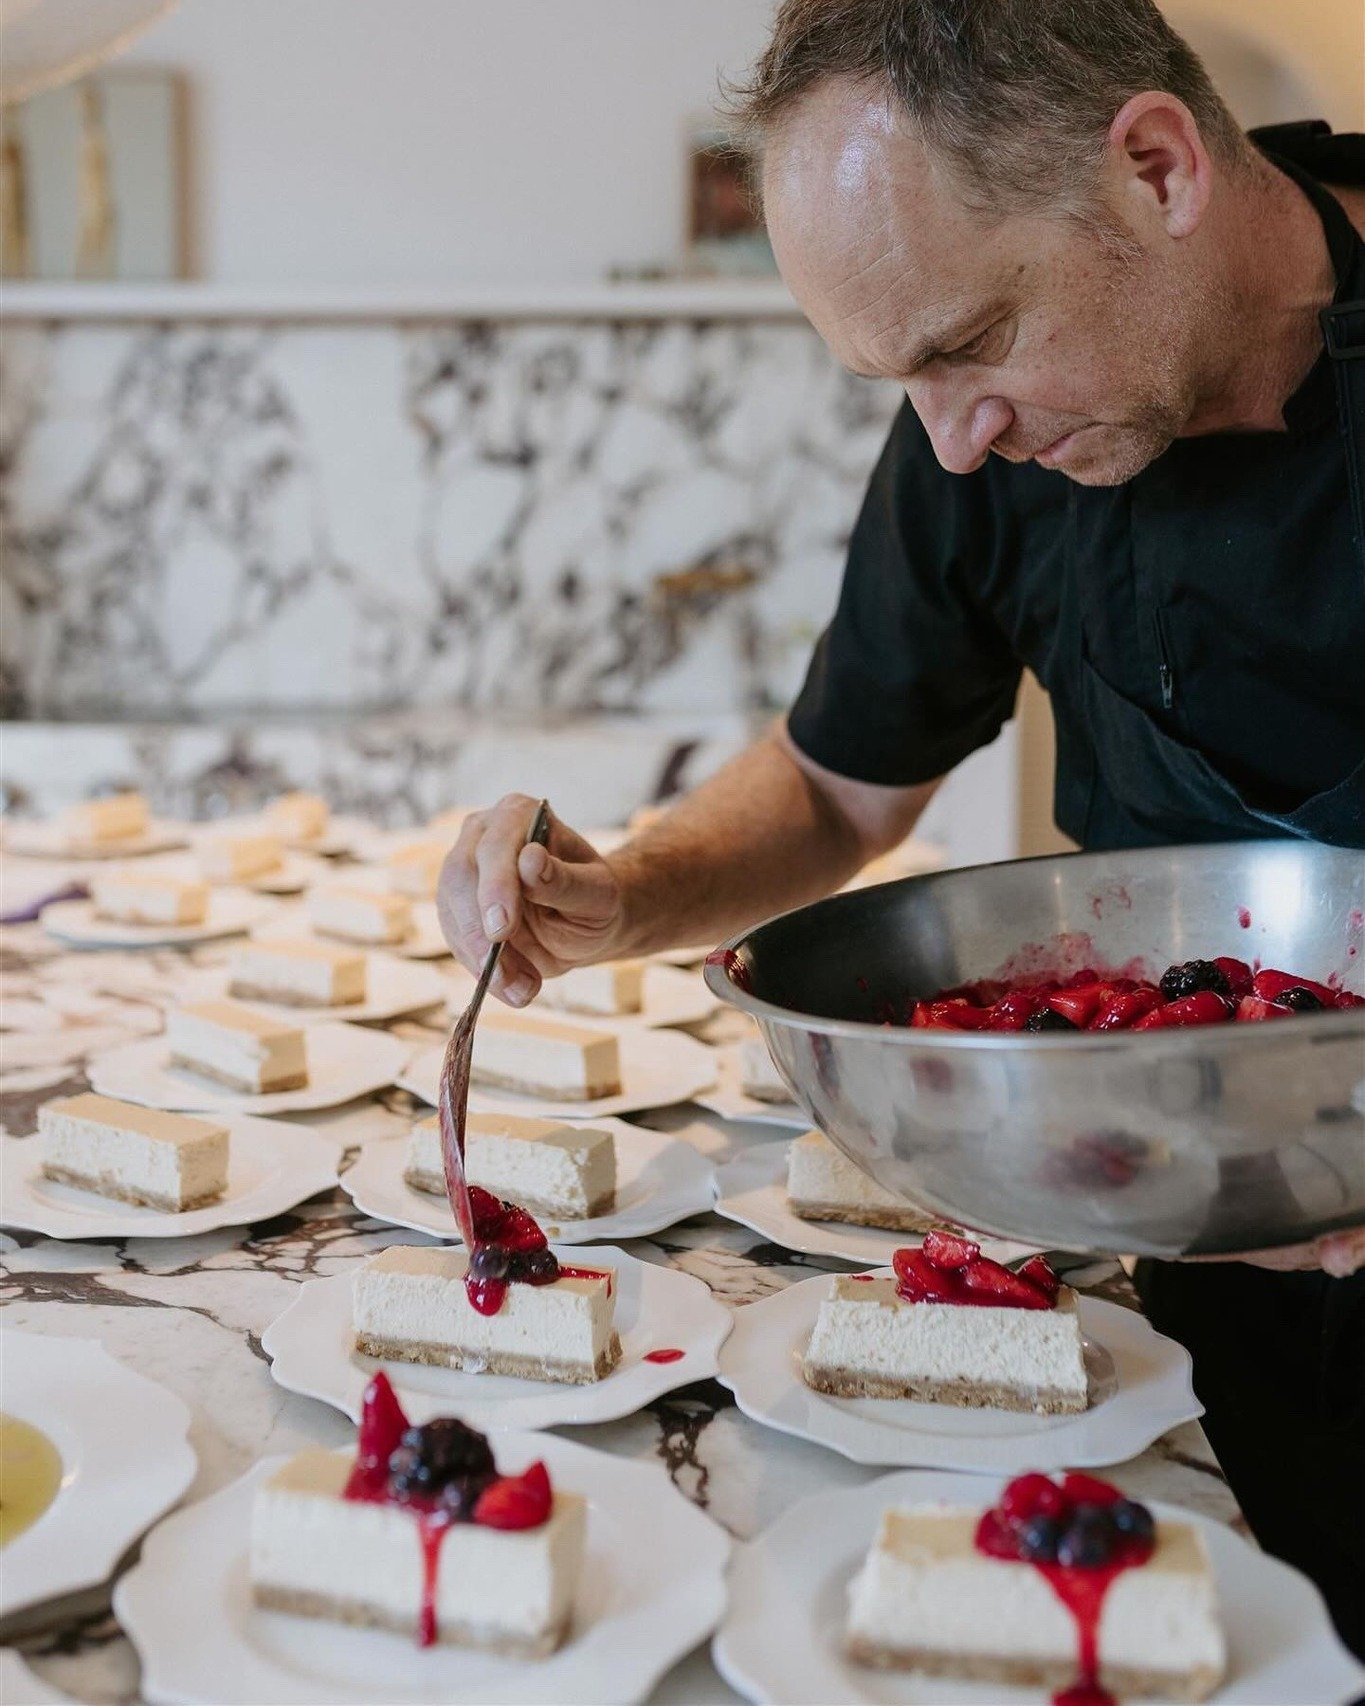 A sweet ending to this ladies lunch - Rob delicately placing finishing touches to these Vanilla Baked Cheesecakes - A crunchy biscuit base with fresh Chantilly cream and fresh fruits.

📷 @leileiclavey @belinda_thecuratedlife_ 

#caterer #catering #e